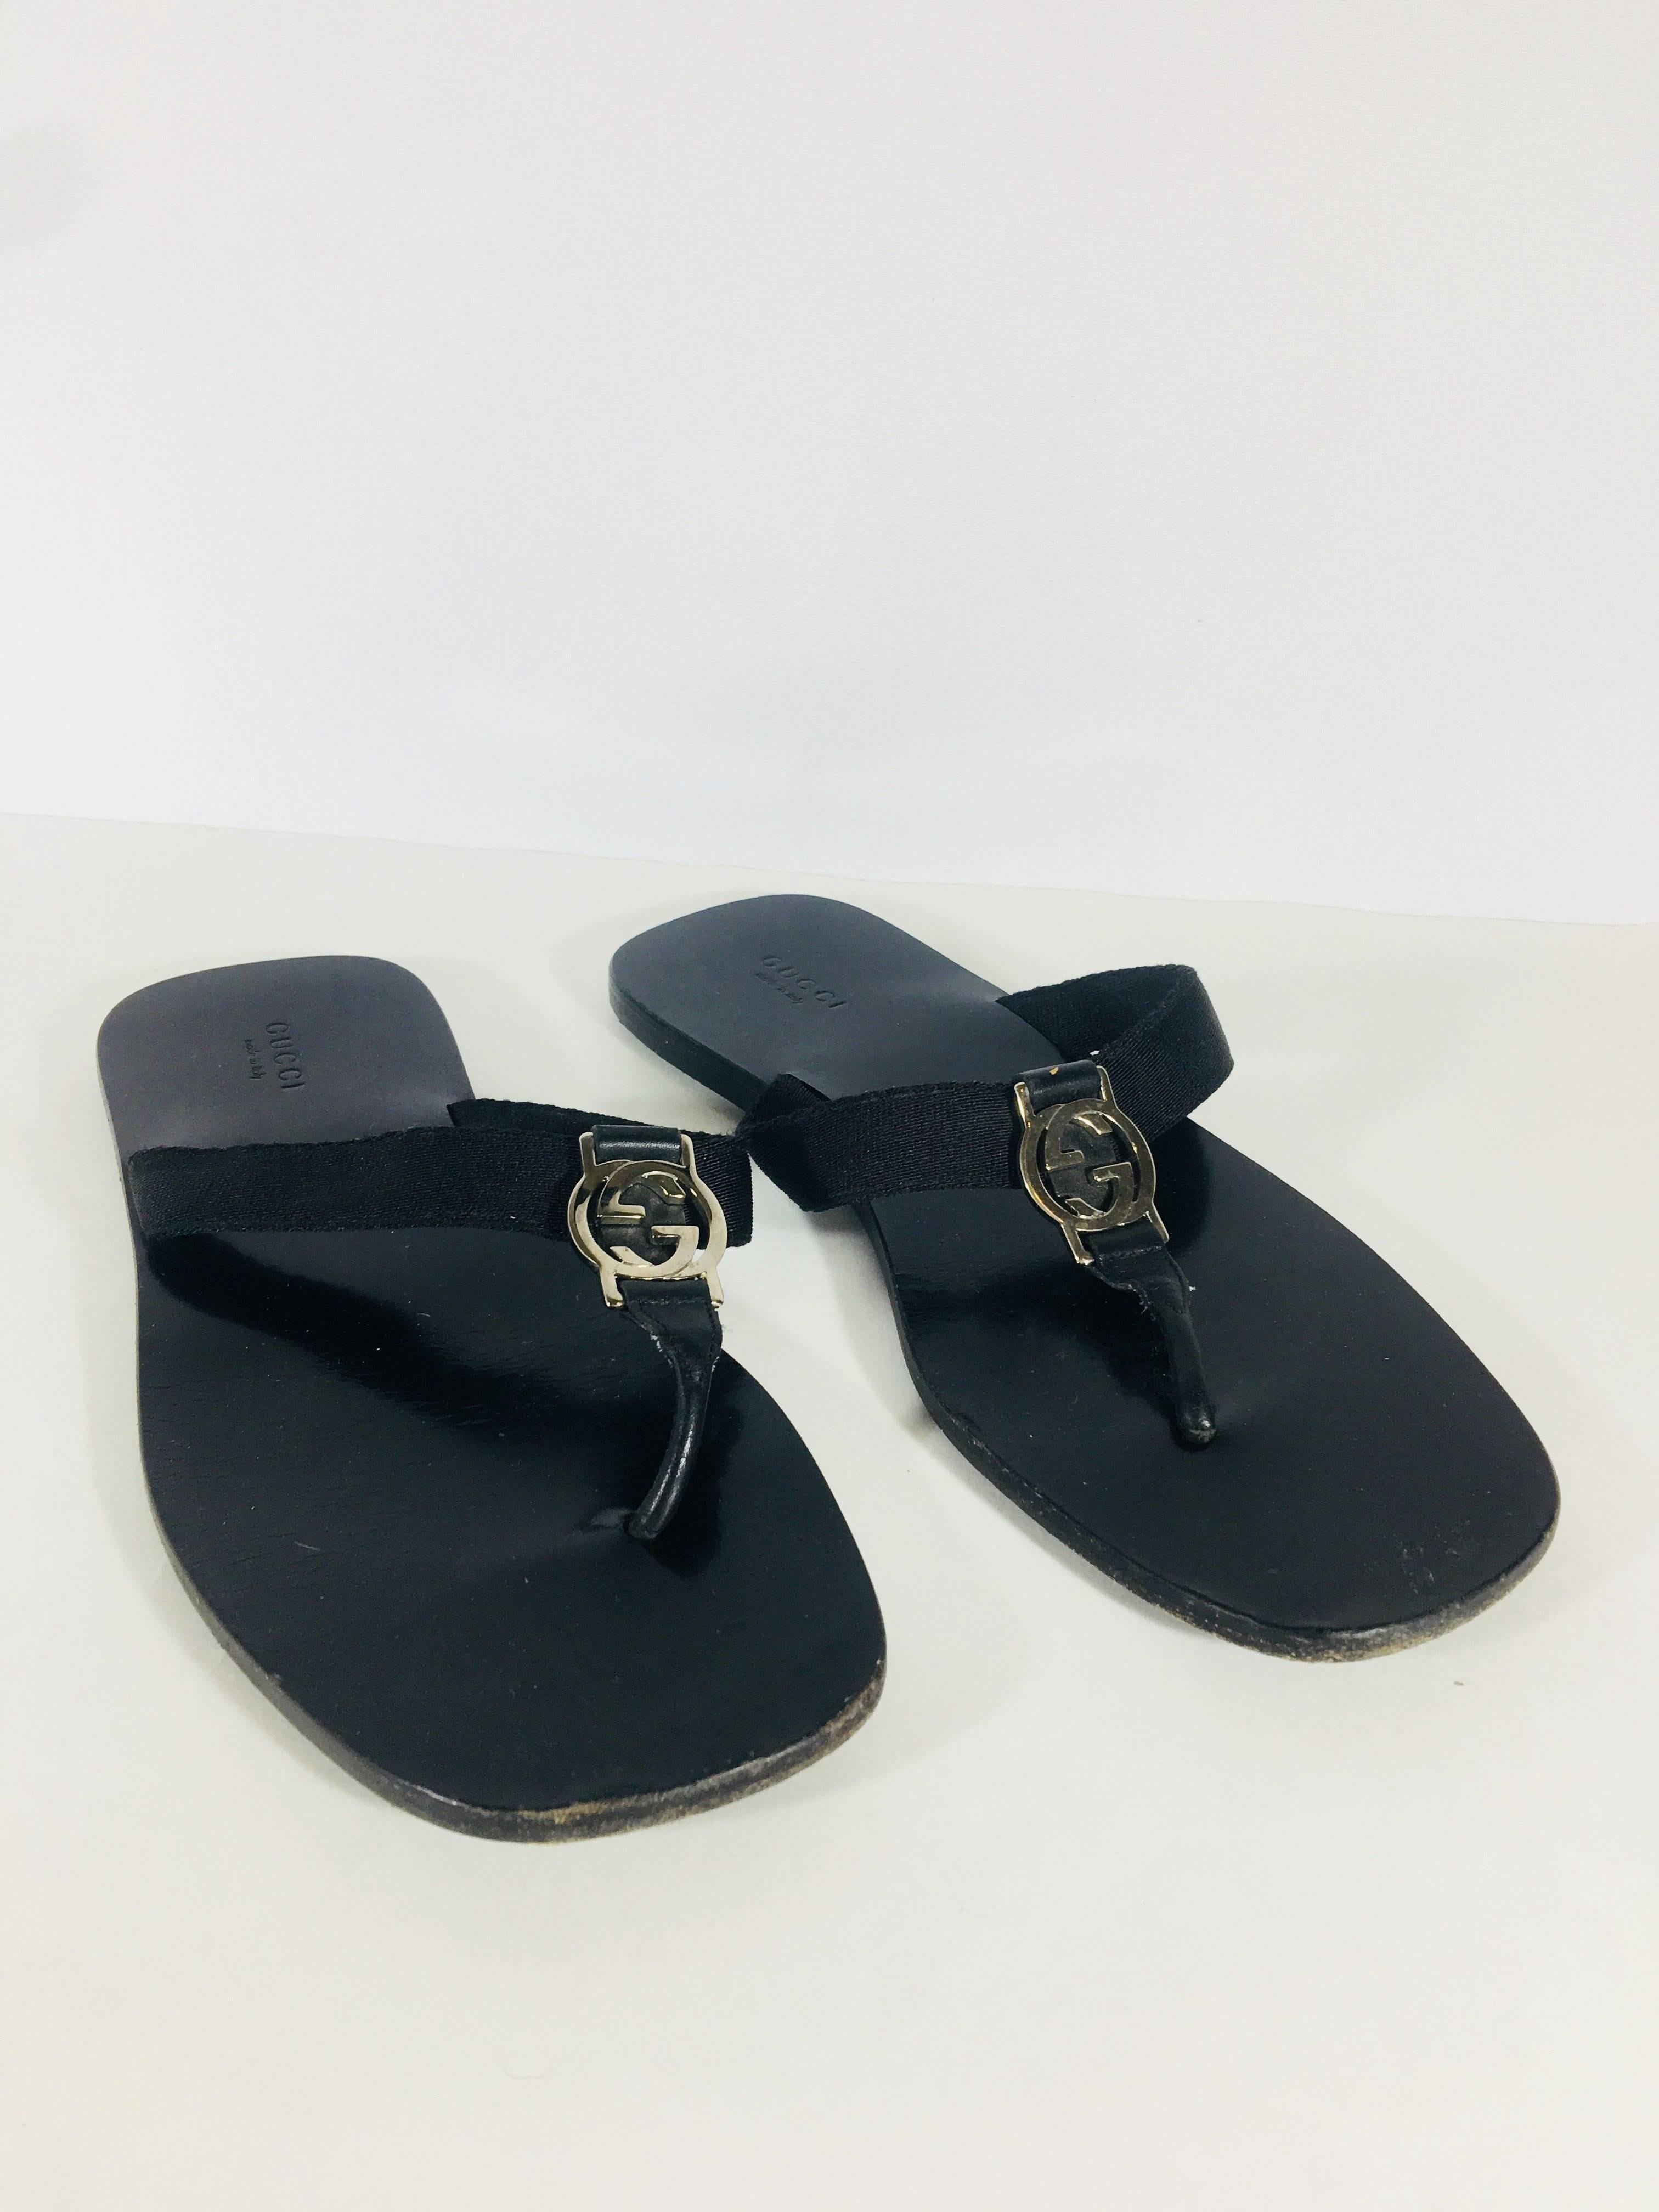 Gucci GG Flip Flops with Silver GG Hardware.